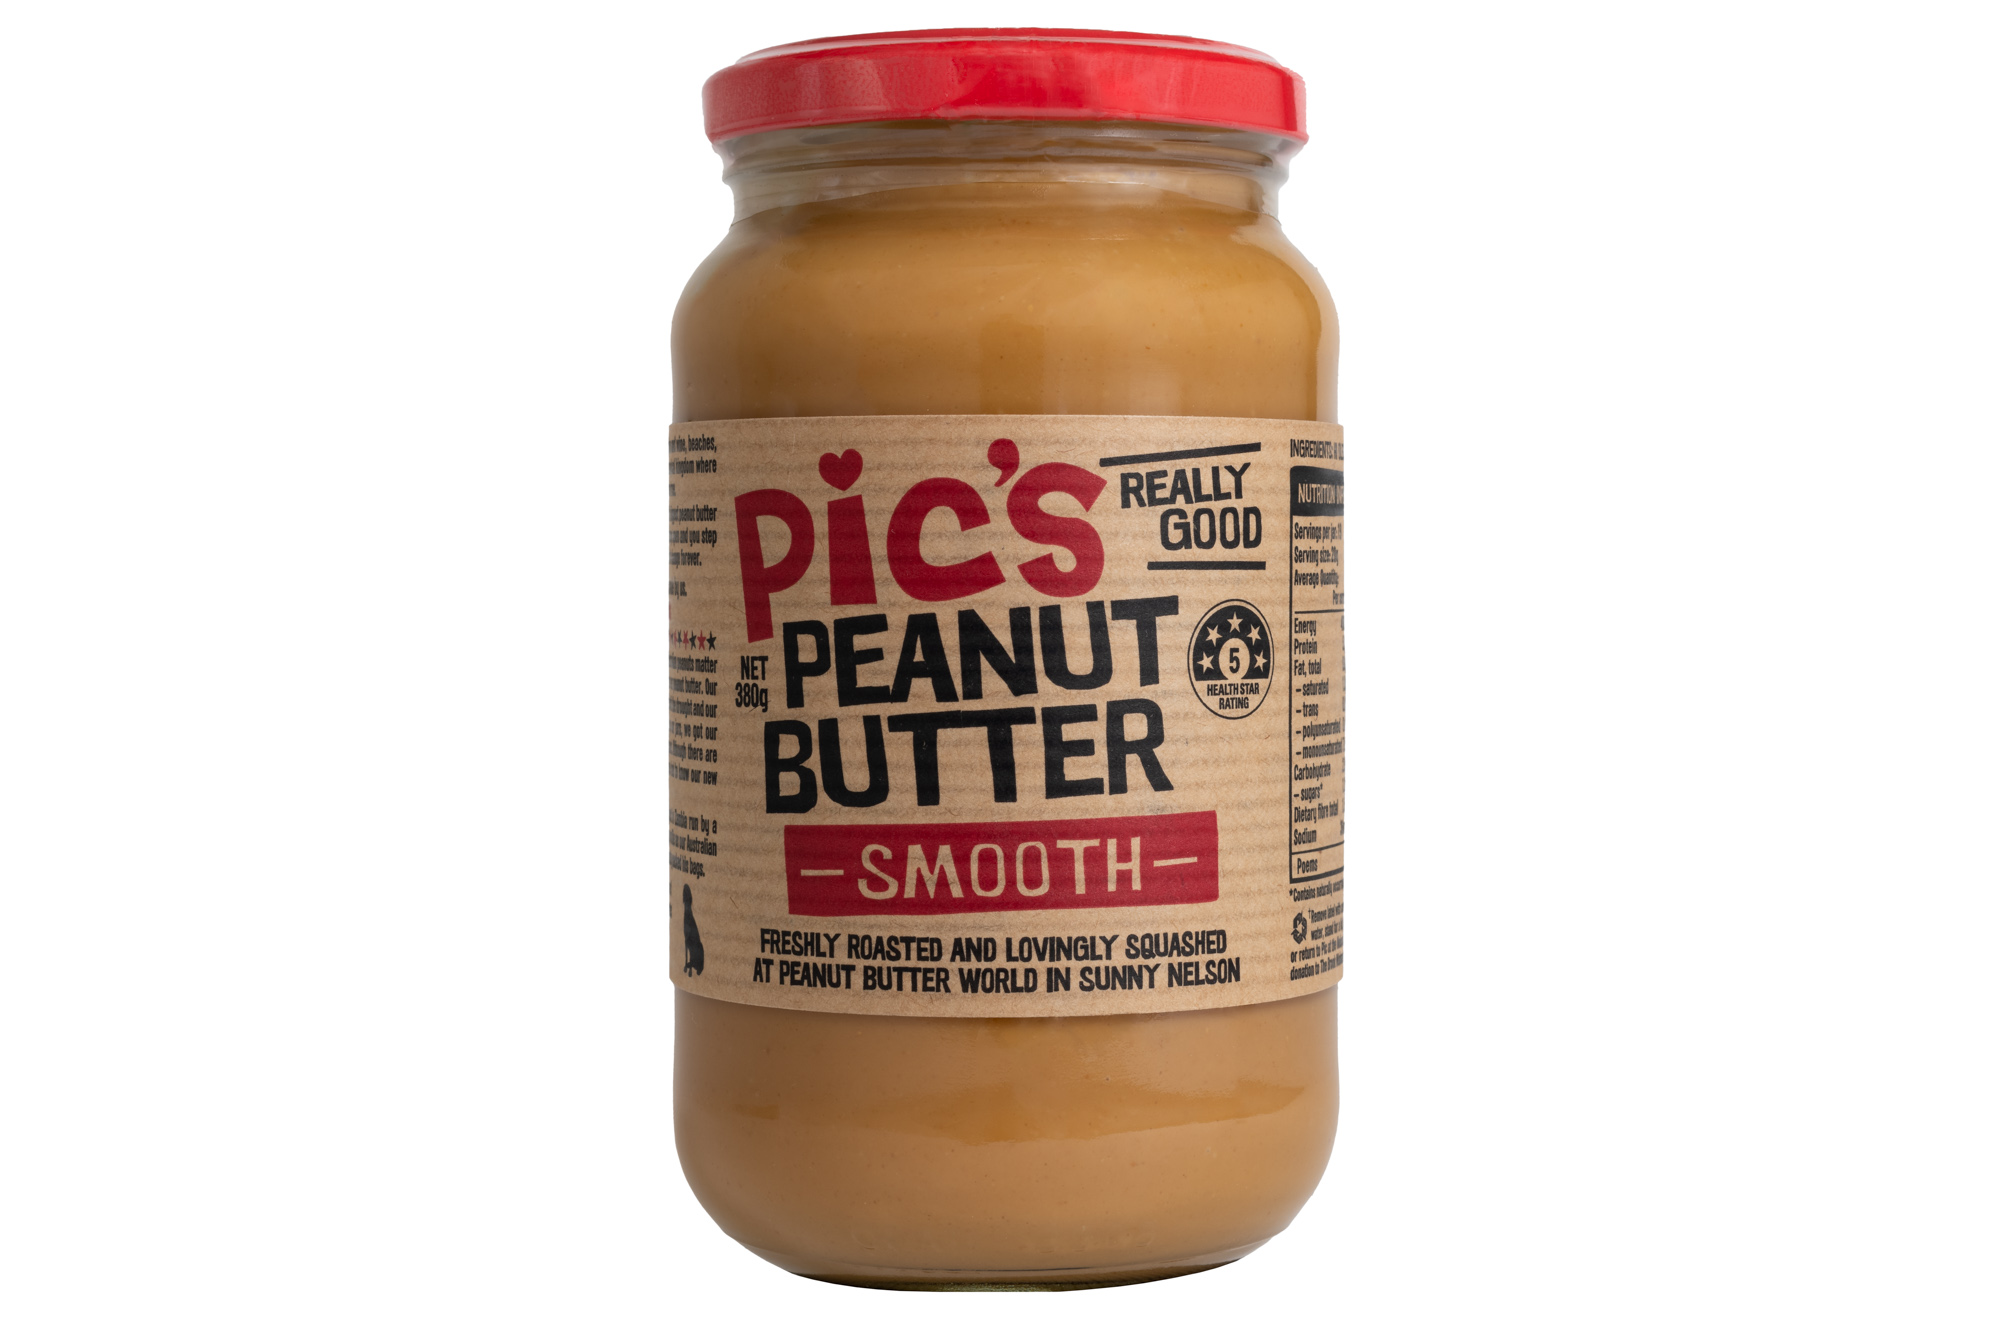 Pic's smooth peanut butter